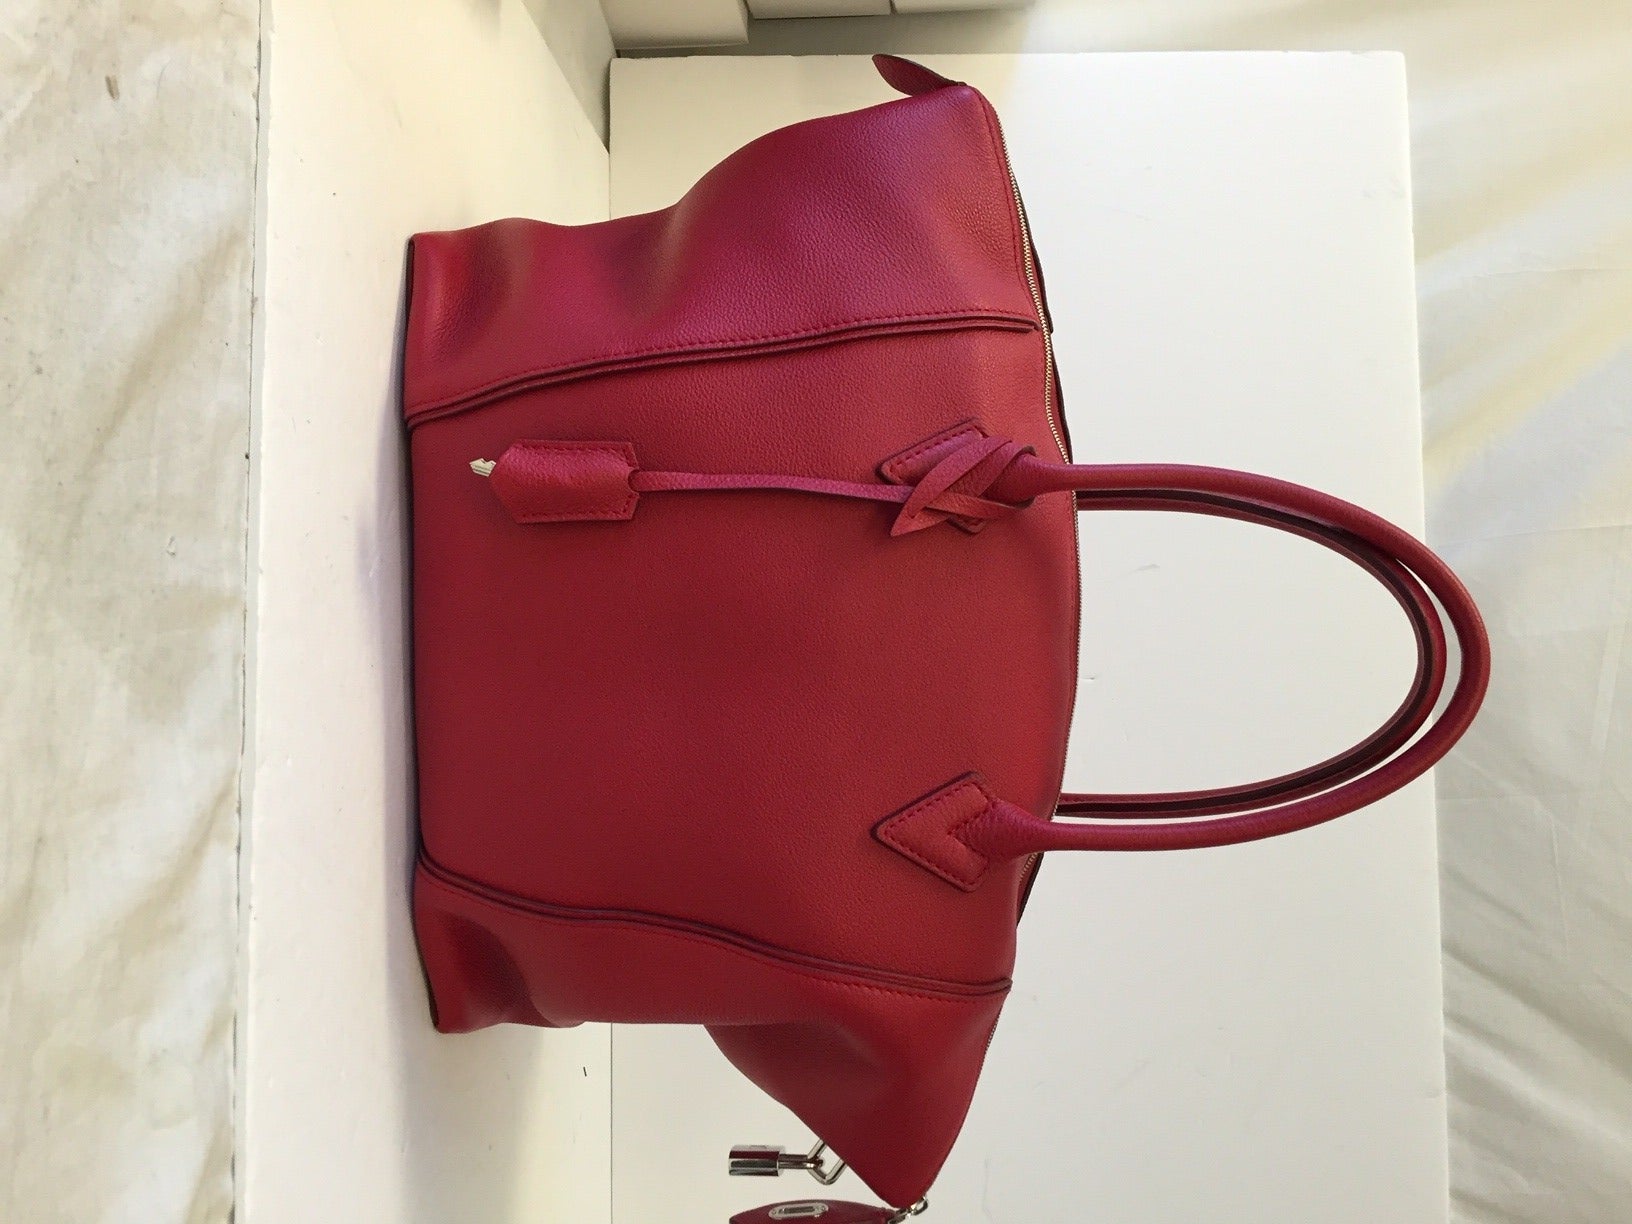 Louis Vuitton Soft Lockit MM Bag In Excellent Condition For Sale In Westmount, Quebec